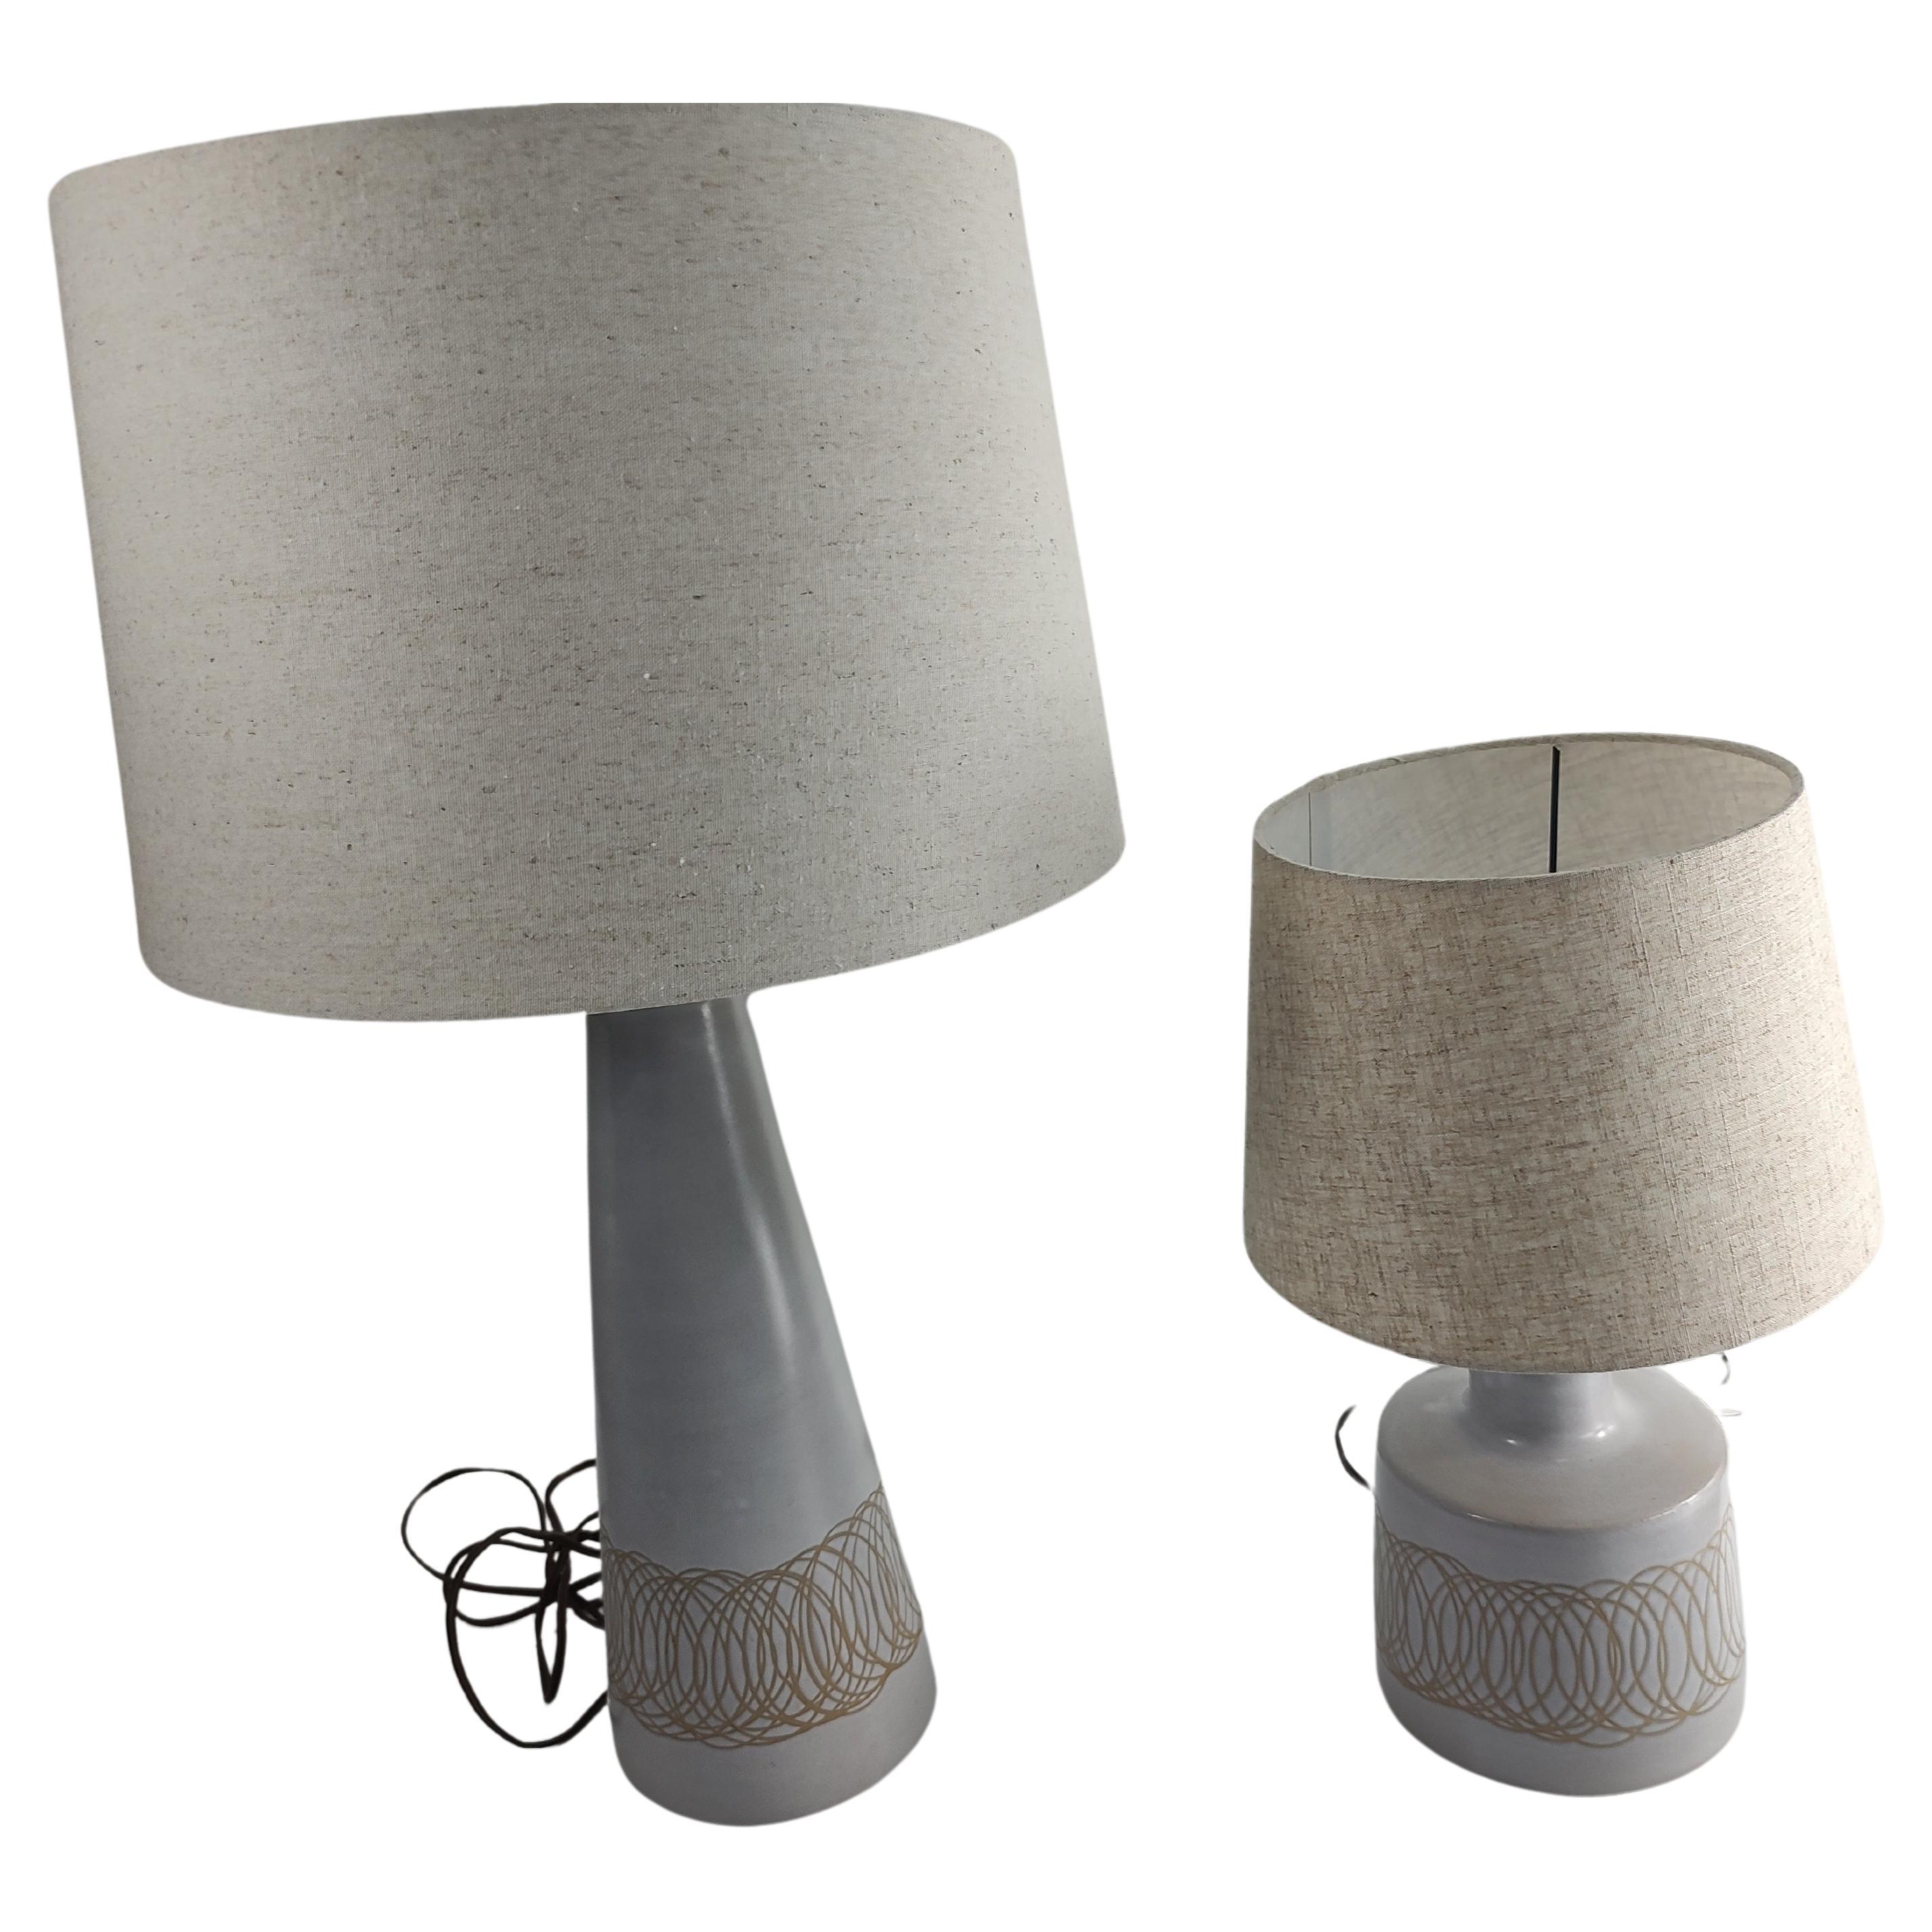 Turned Pair of Complimentary Ceramic Table Lamps by Gordon & Jane Martz with Shades  For Sale